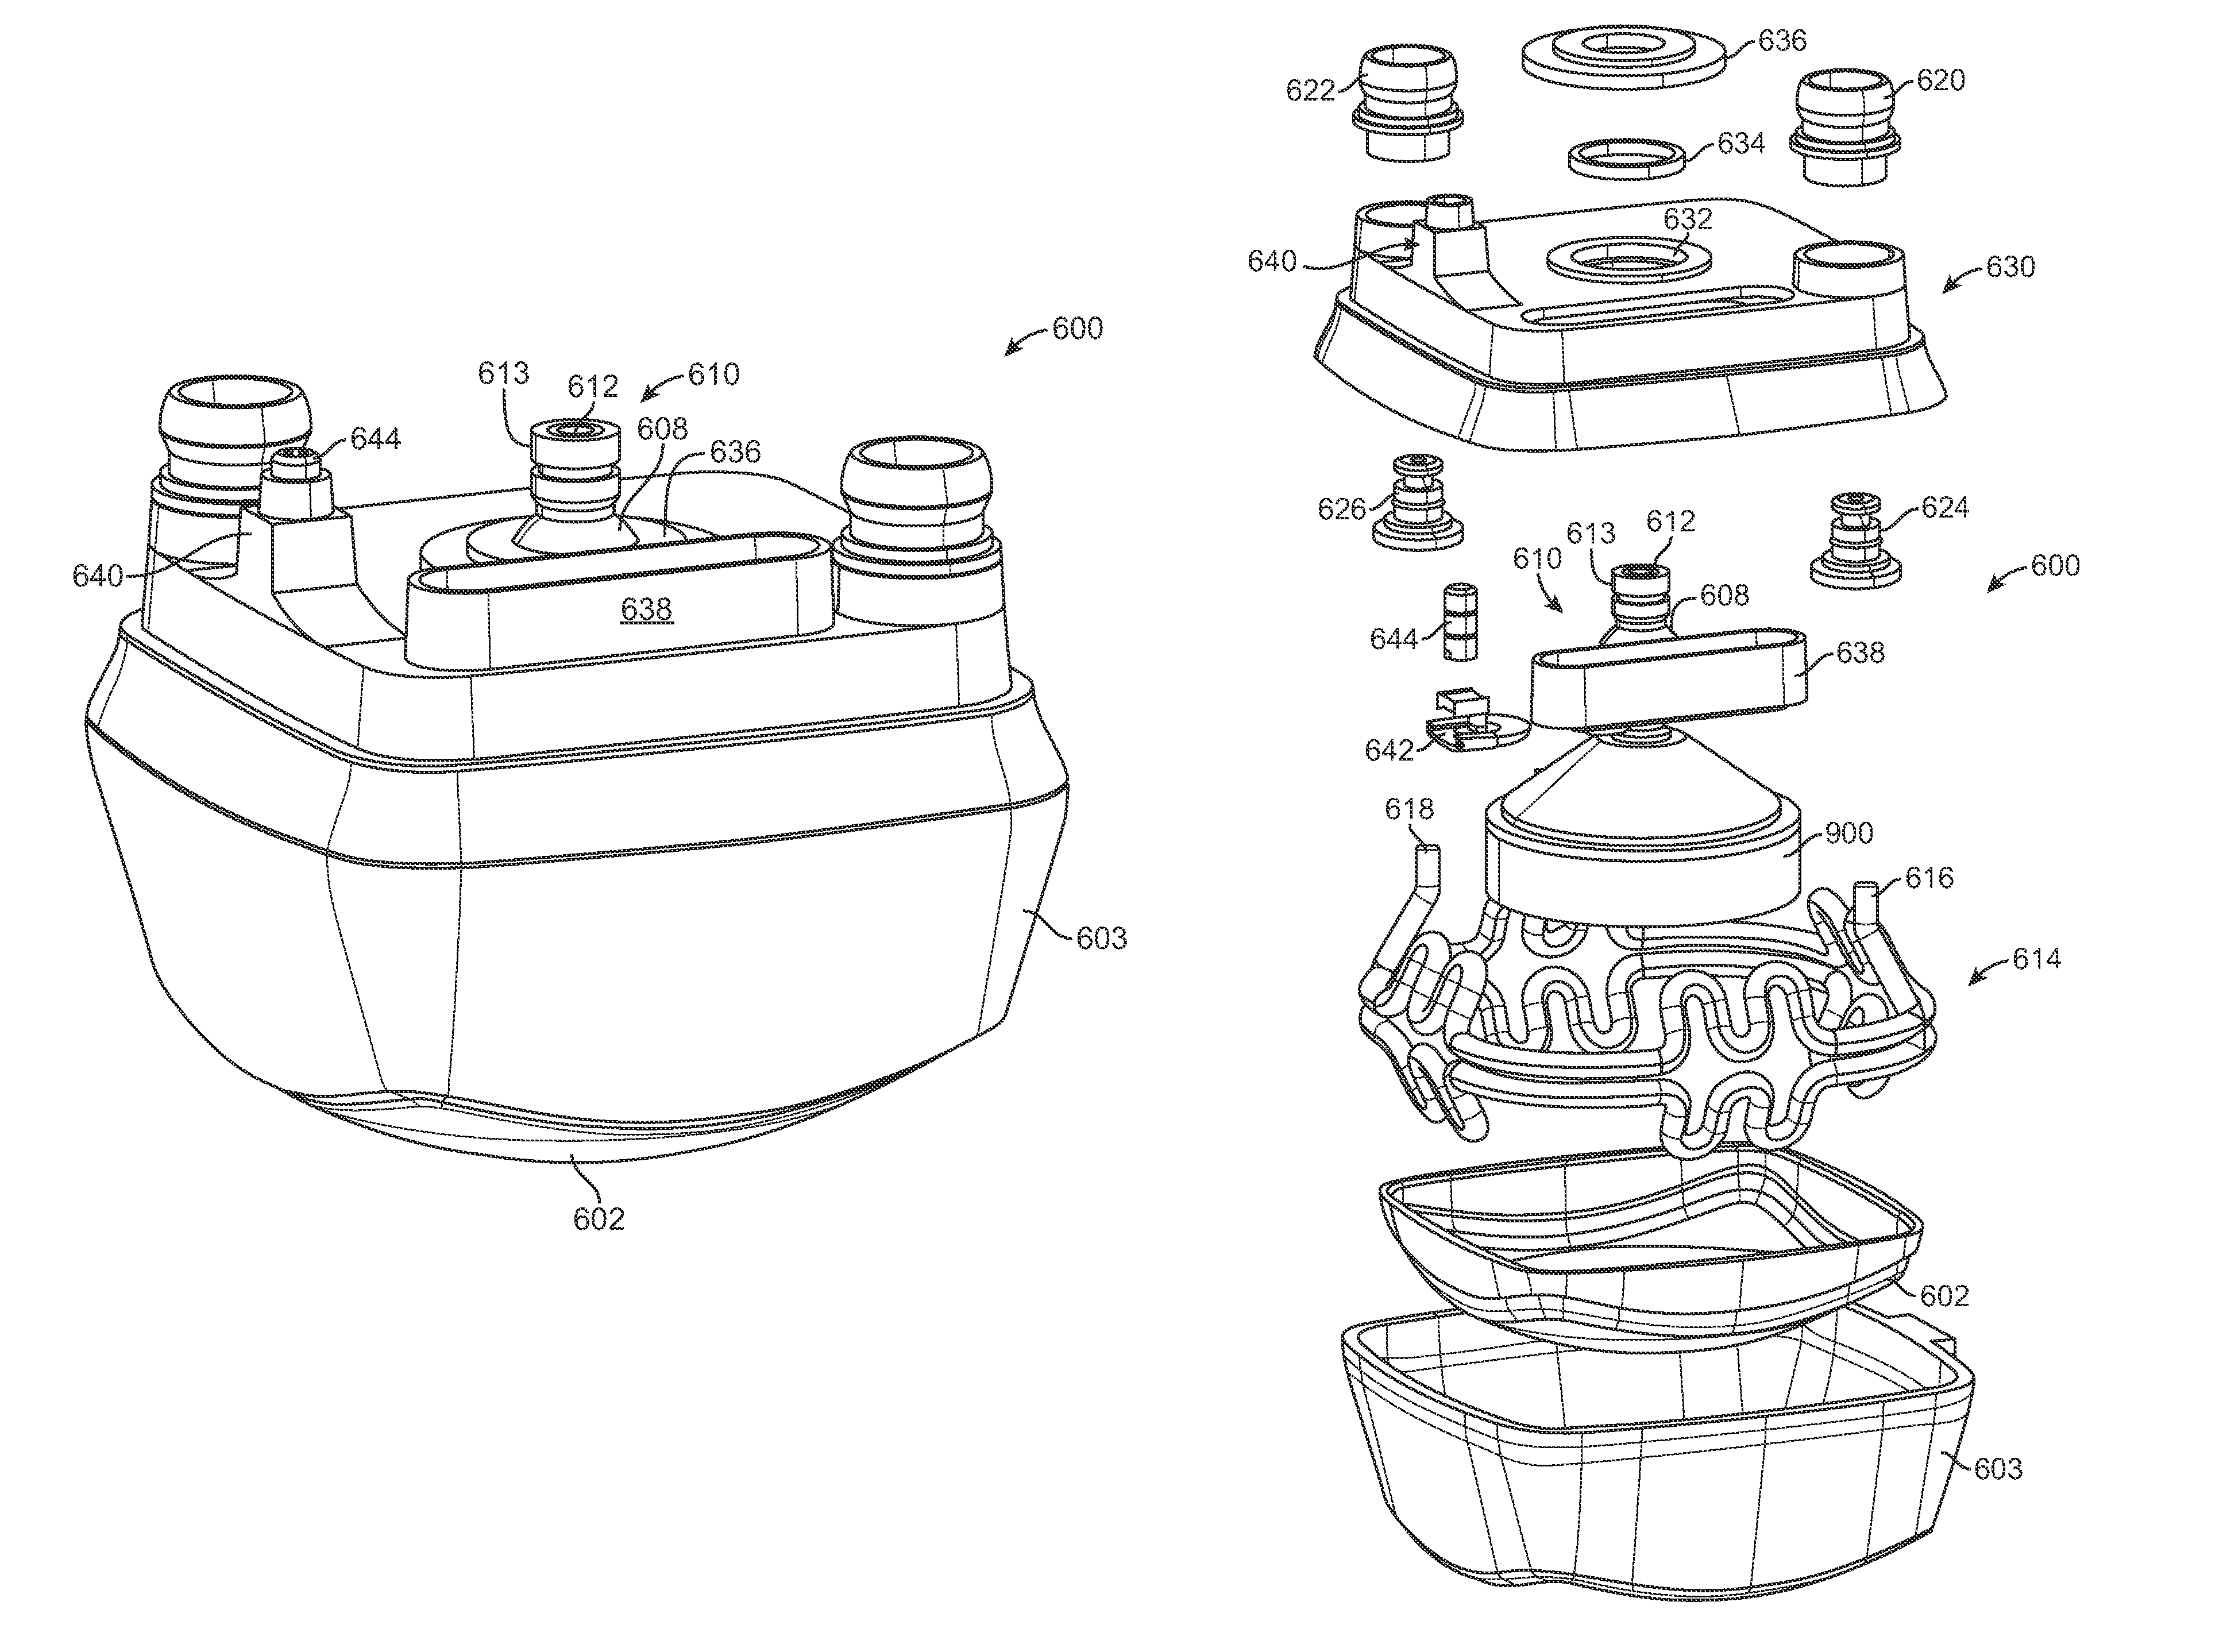 Modified atmosphere packaging for ultrasound transducer cartridge